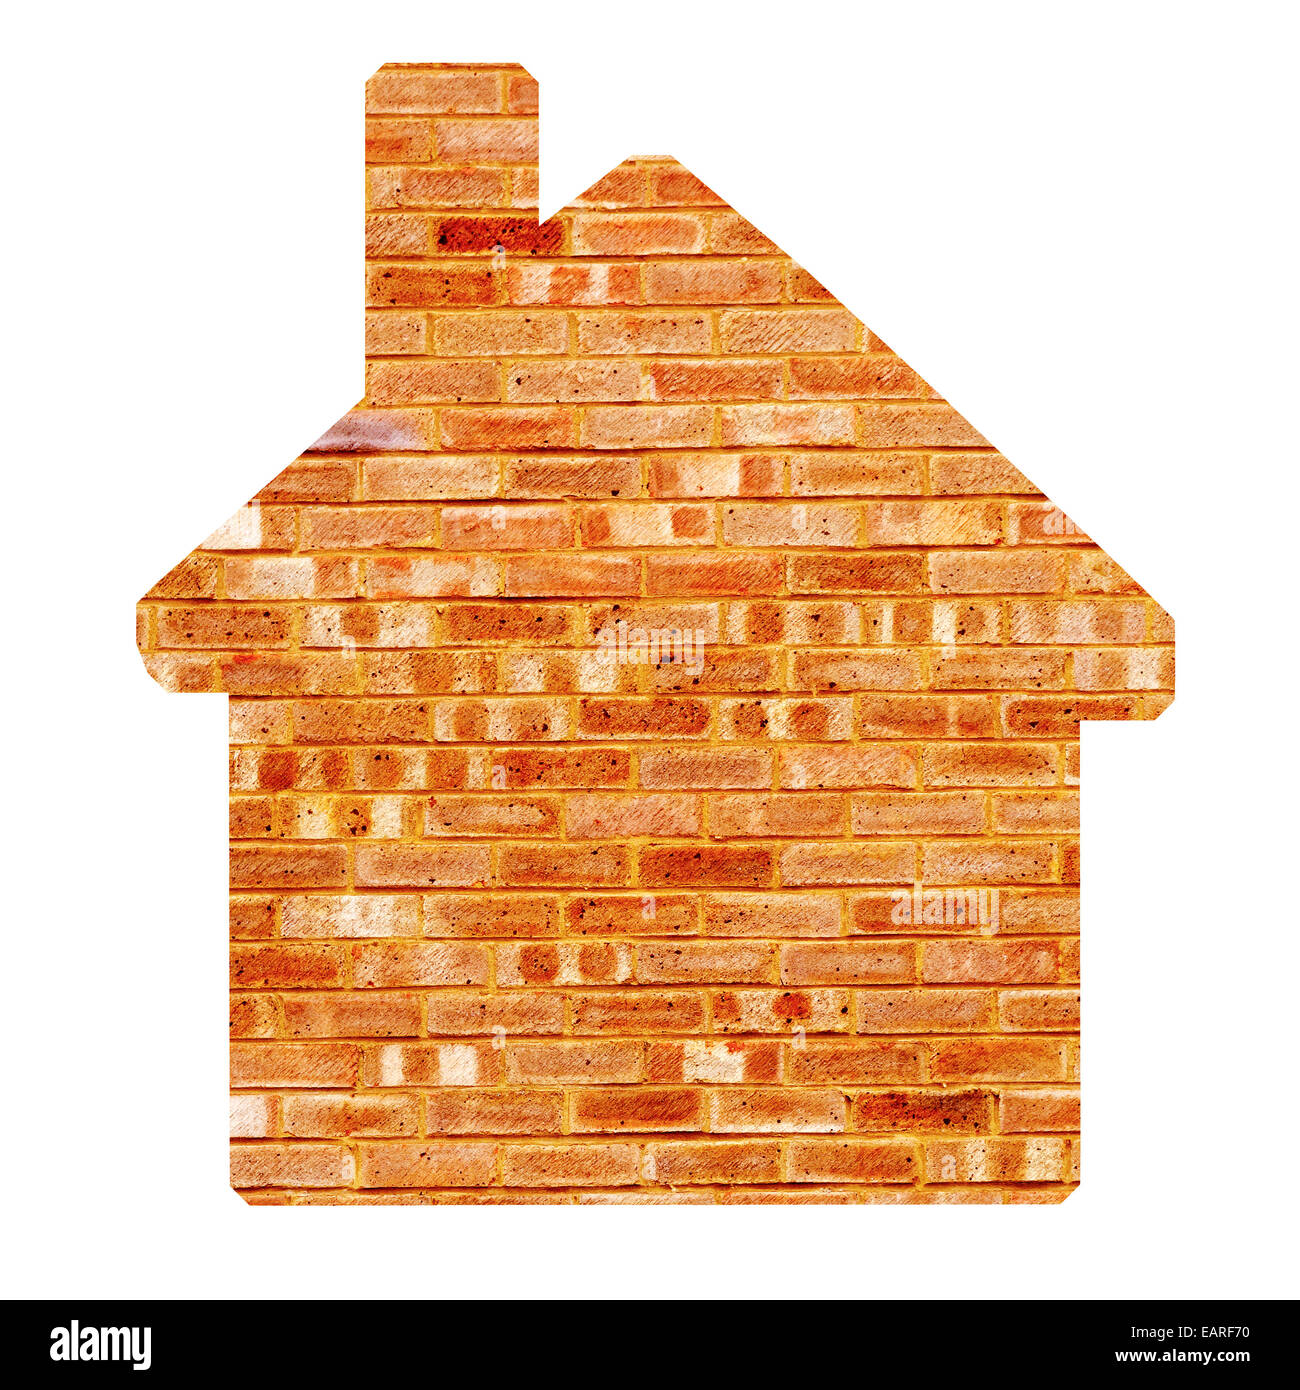 House shaped bricks concept. Cut out on white. Stock Photo